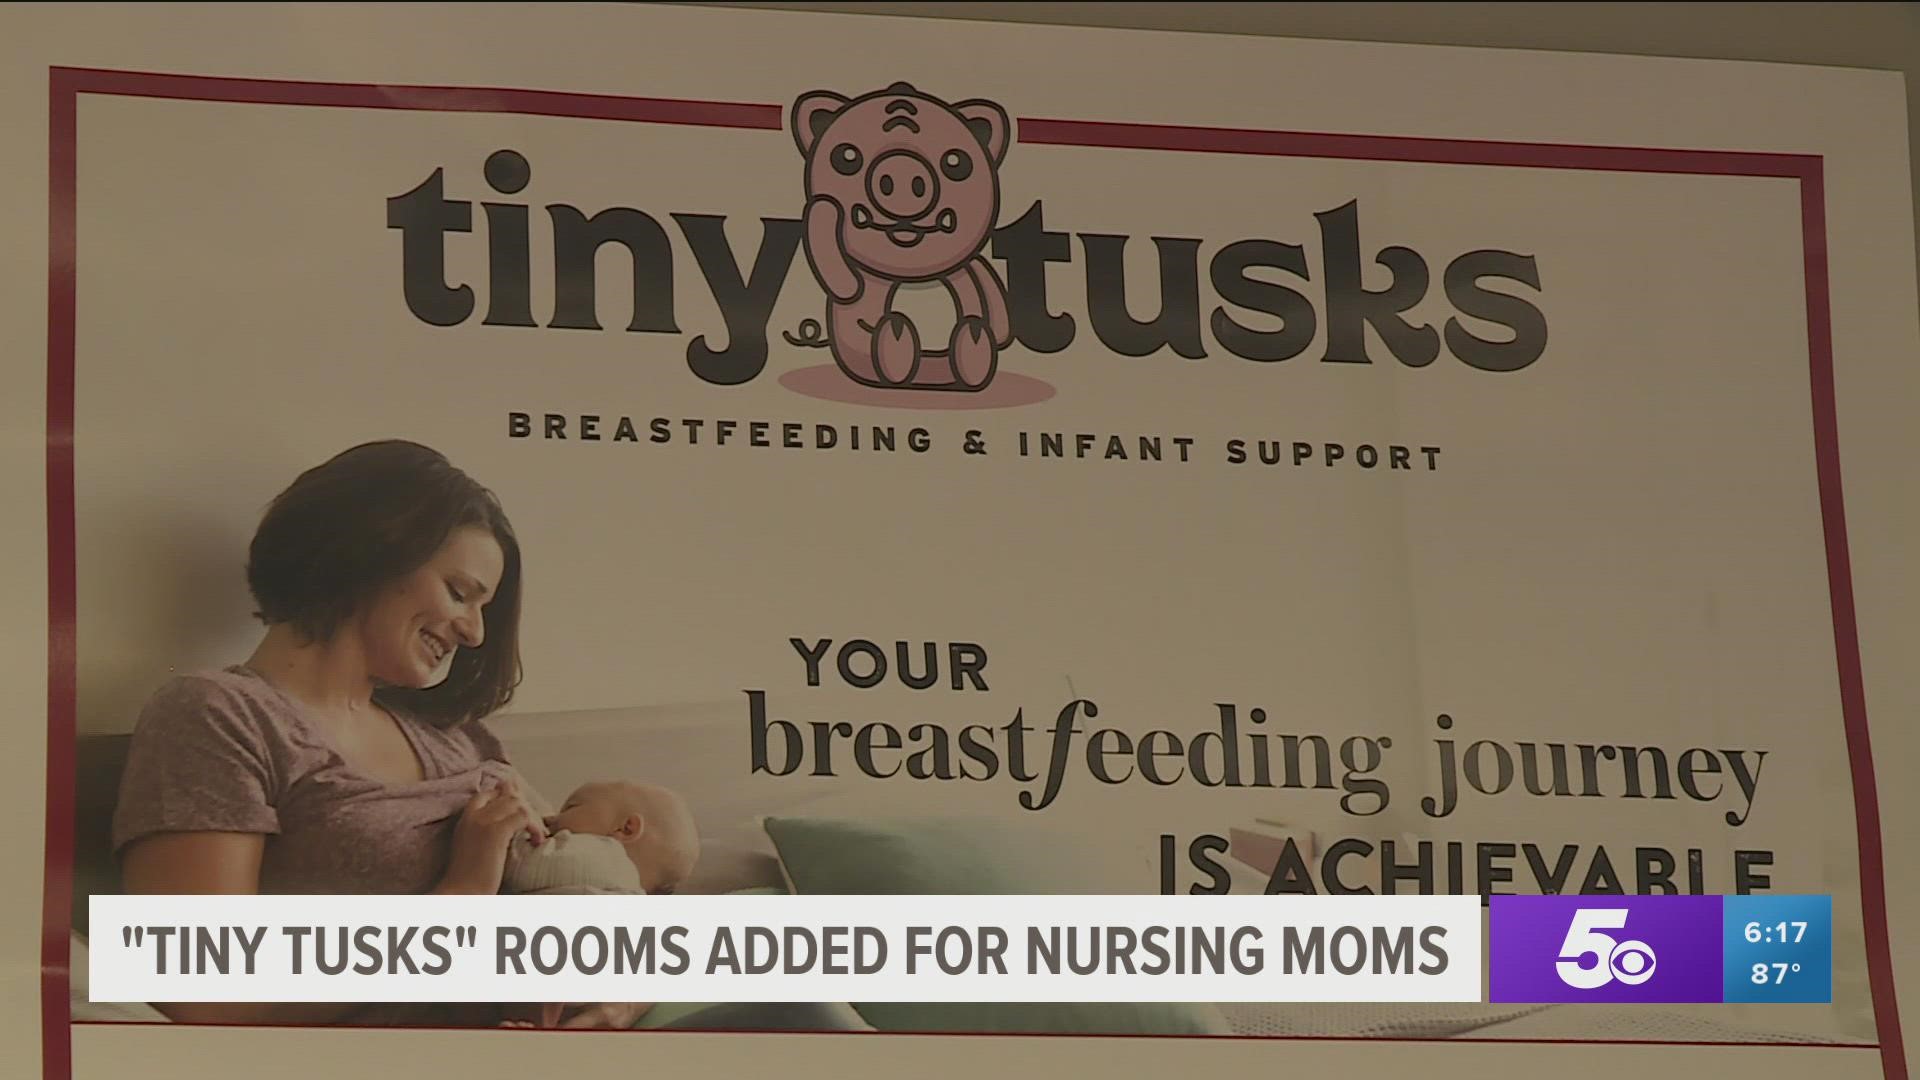 The rooms are dedicated solely to nursing parents and their kids.